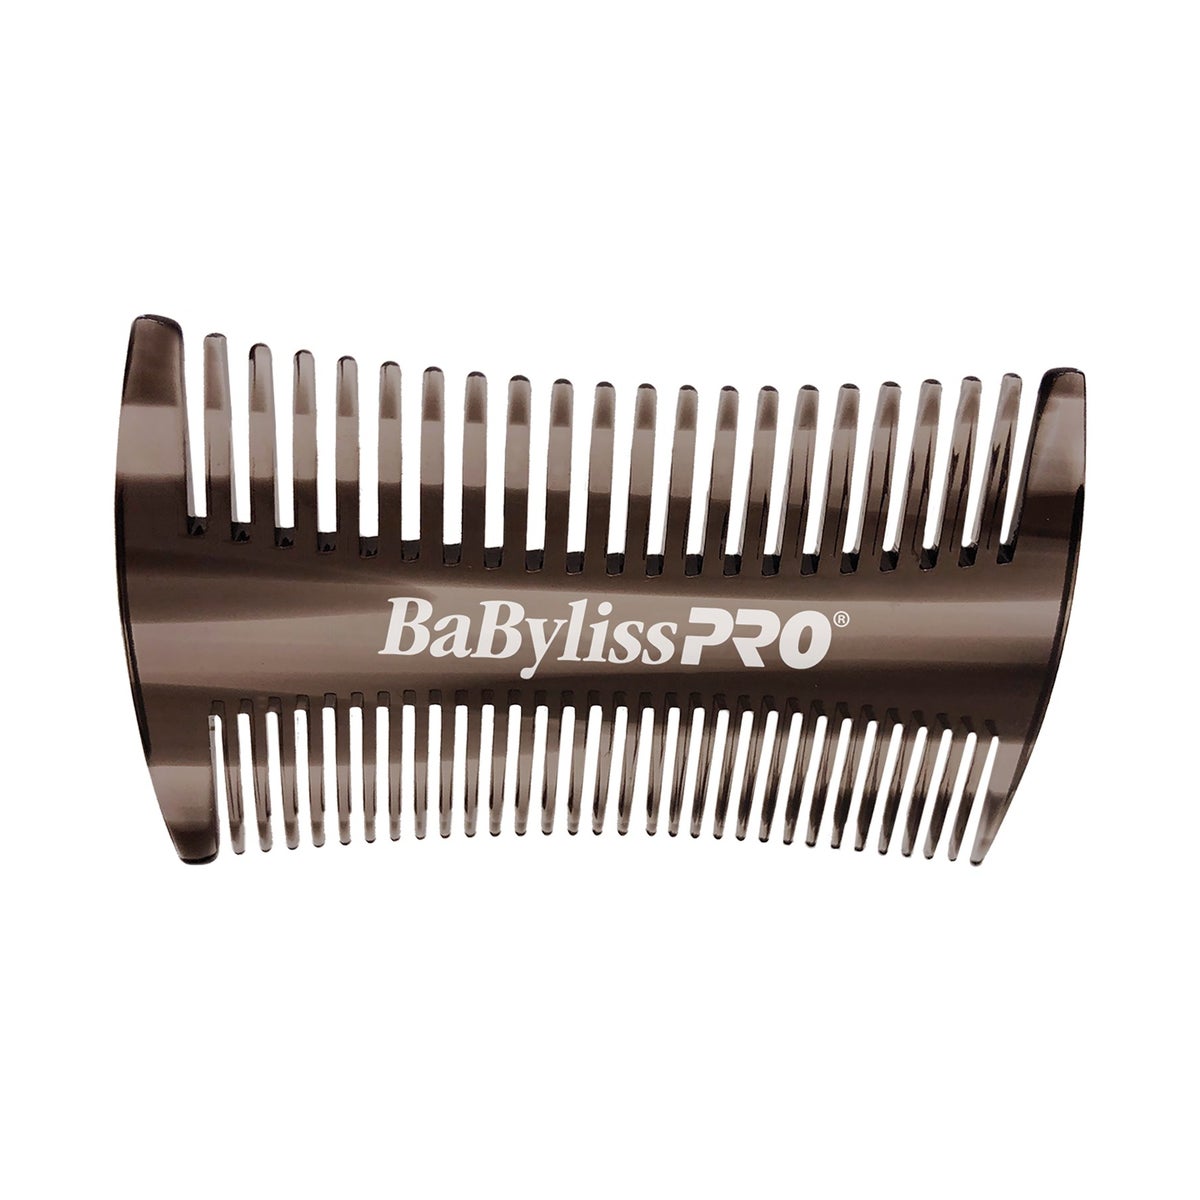 Babylisspro 2-in-1 Beard &amp; Moustache Comb, 2-11/16 Inch, Black